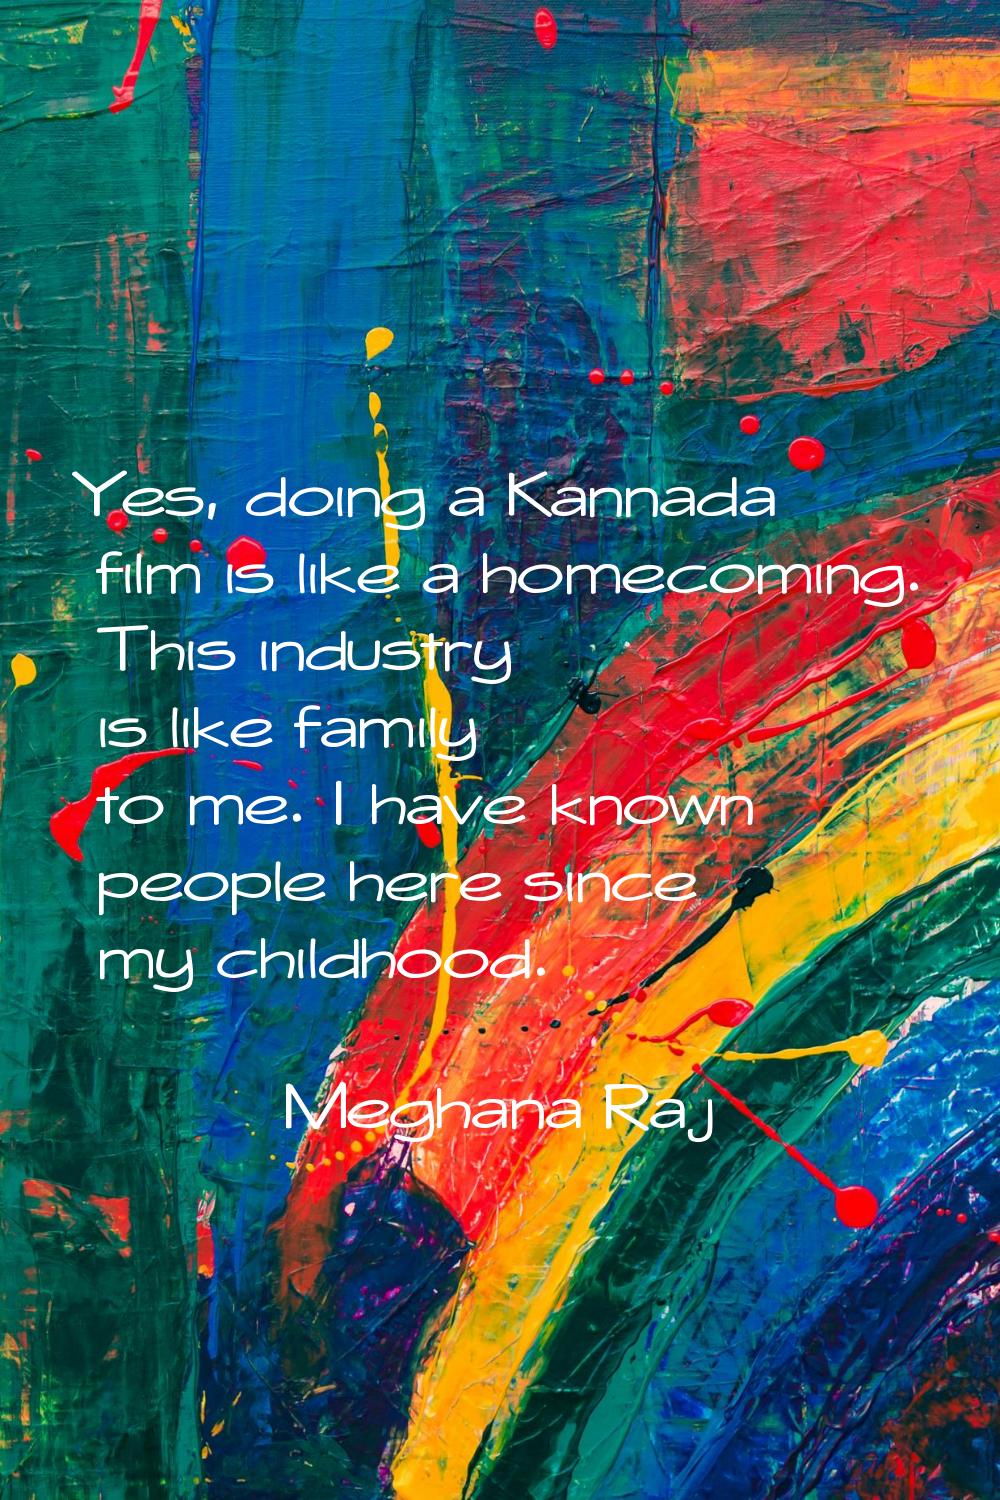 Yes, doing a Kannada film is like a homecoming. This industry is like family to me. I have known pe